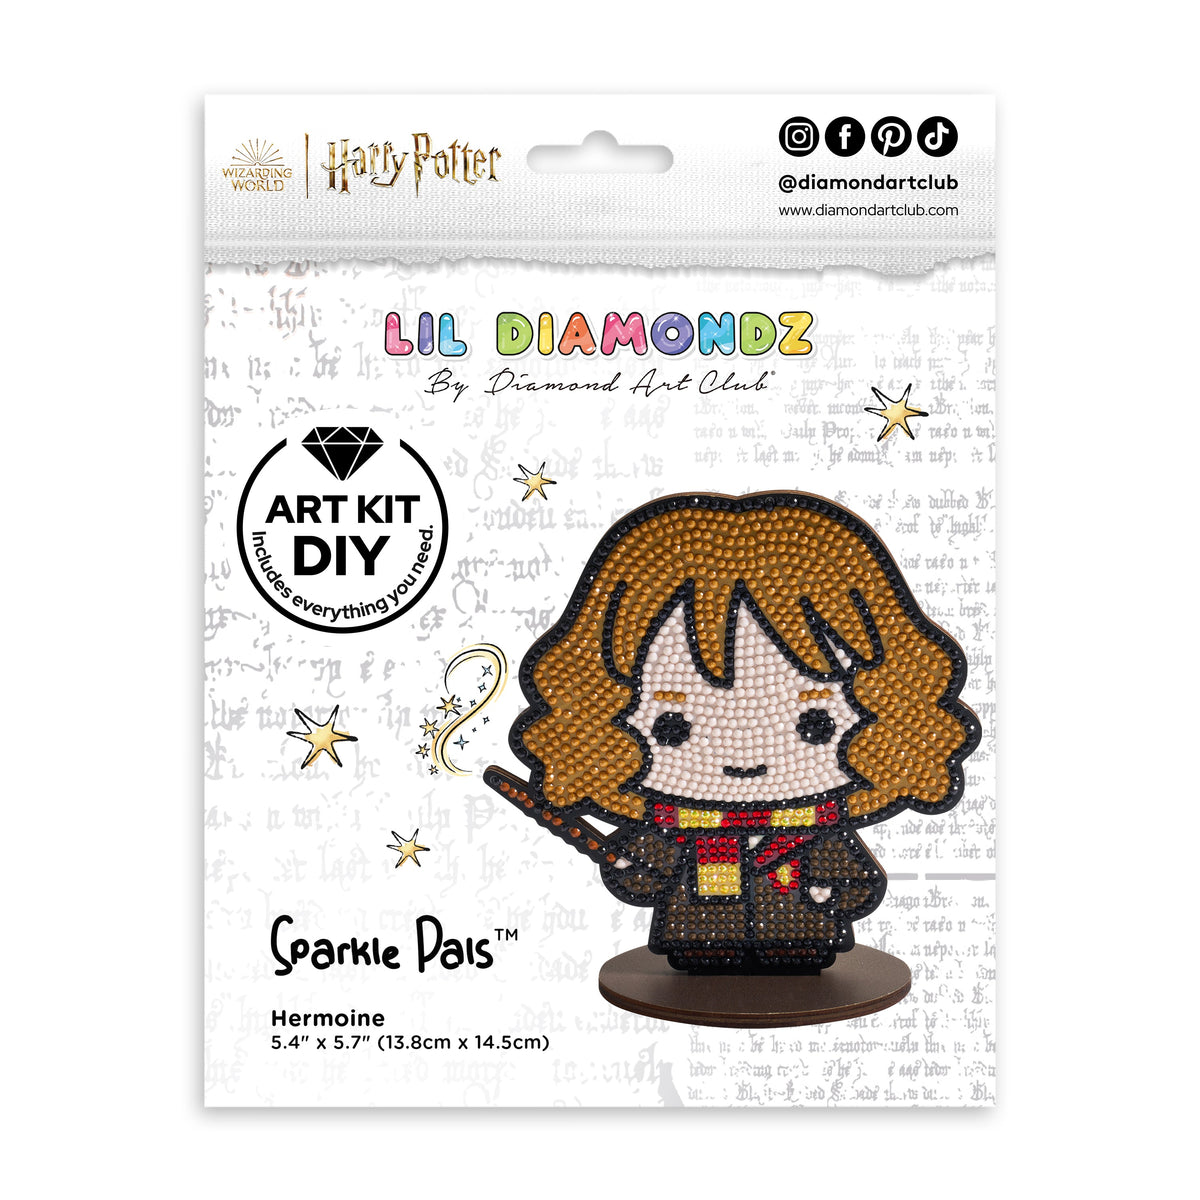 Diamond Painting Sparkle Pals™ - Hermione 5.4" x 5.7" (13.8cm x 14.5cm) / Round with 8 Colors including 1 AB, 2 Fairy Dust Diamonds and 1 Iridescent Diamond / 1,325